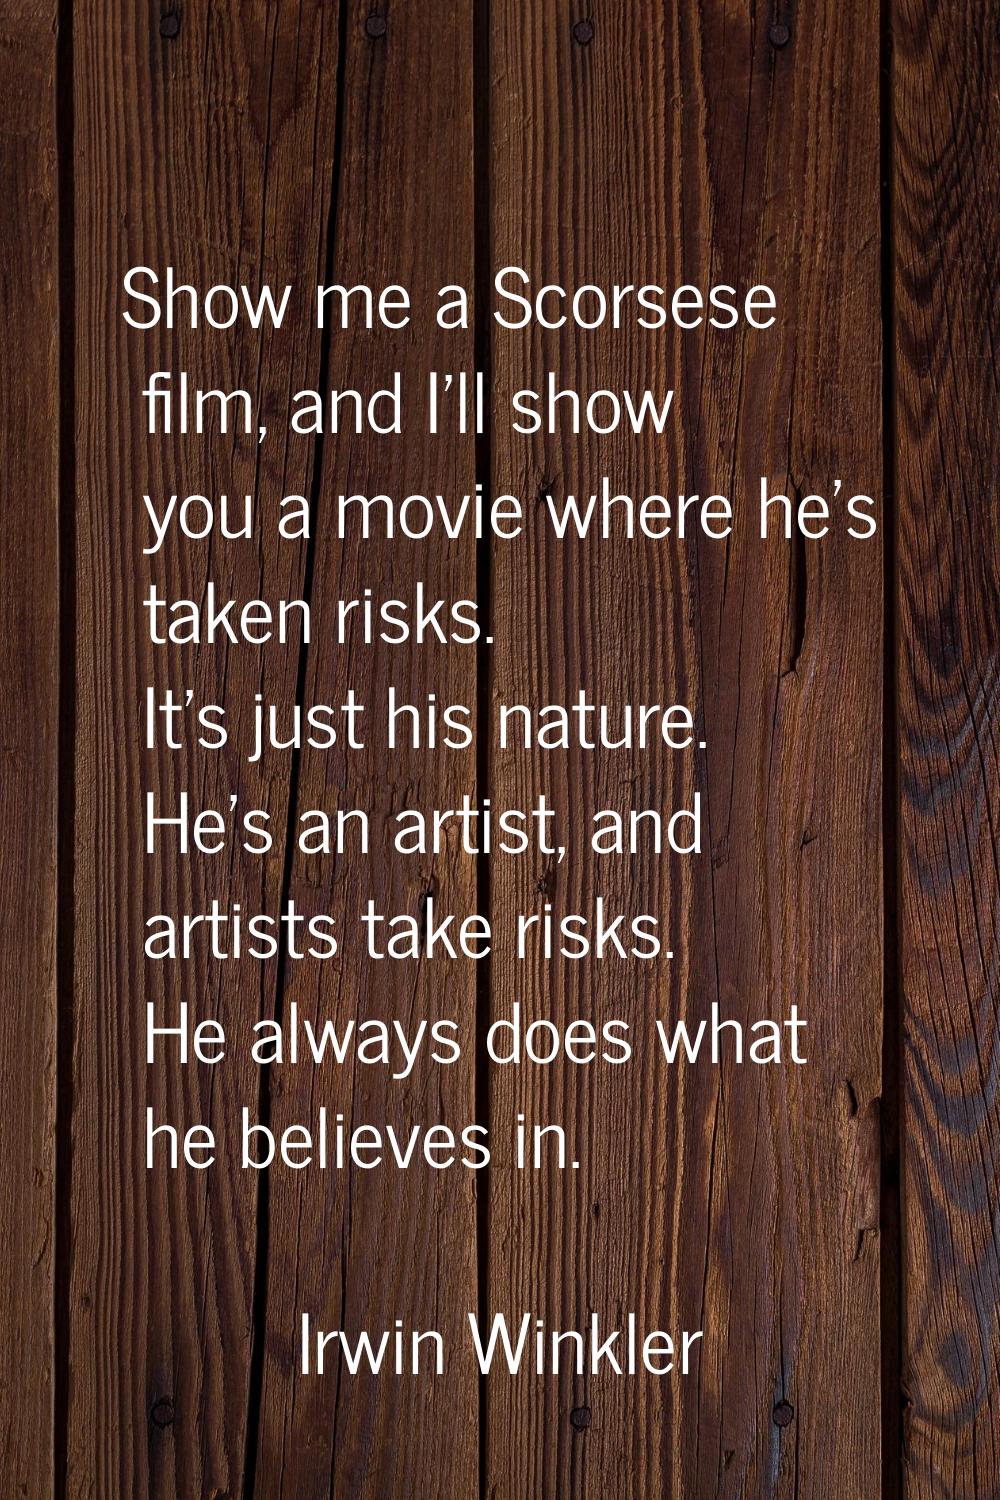 Show me a Scorsese film, and I'll show you a movie where he's taken risks. It's just his nature. He